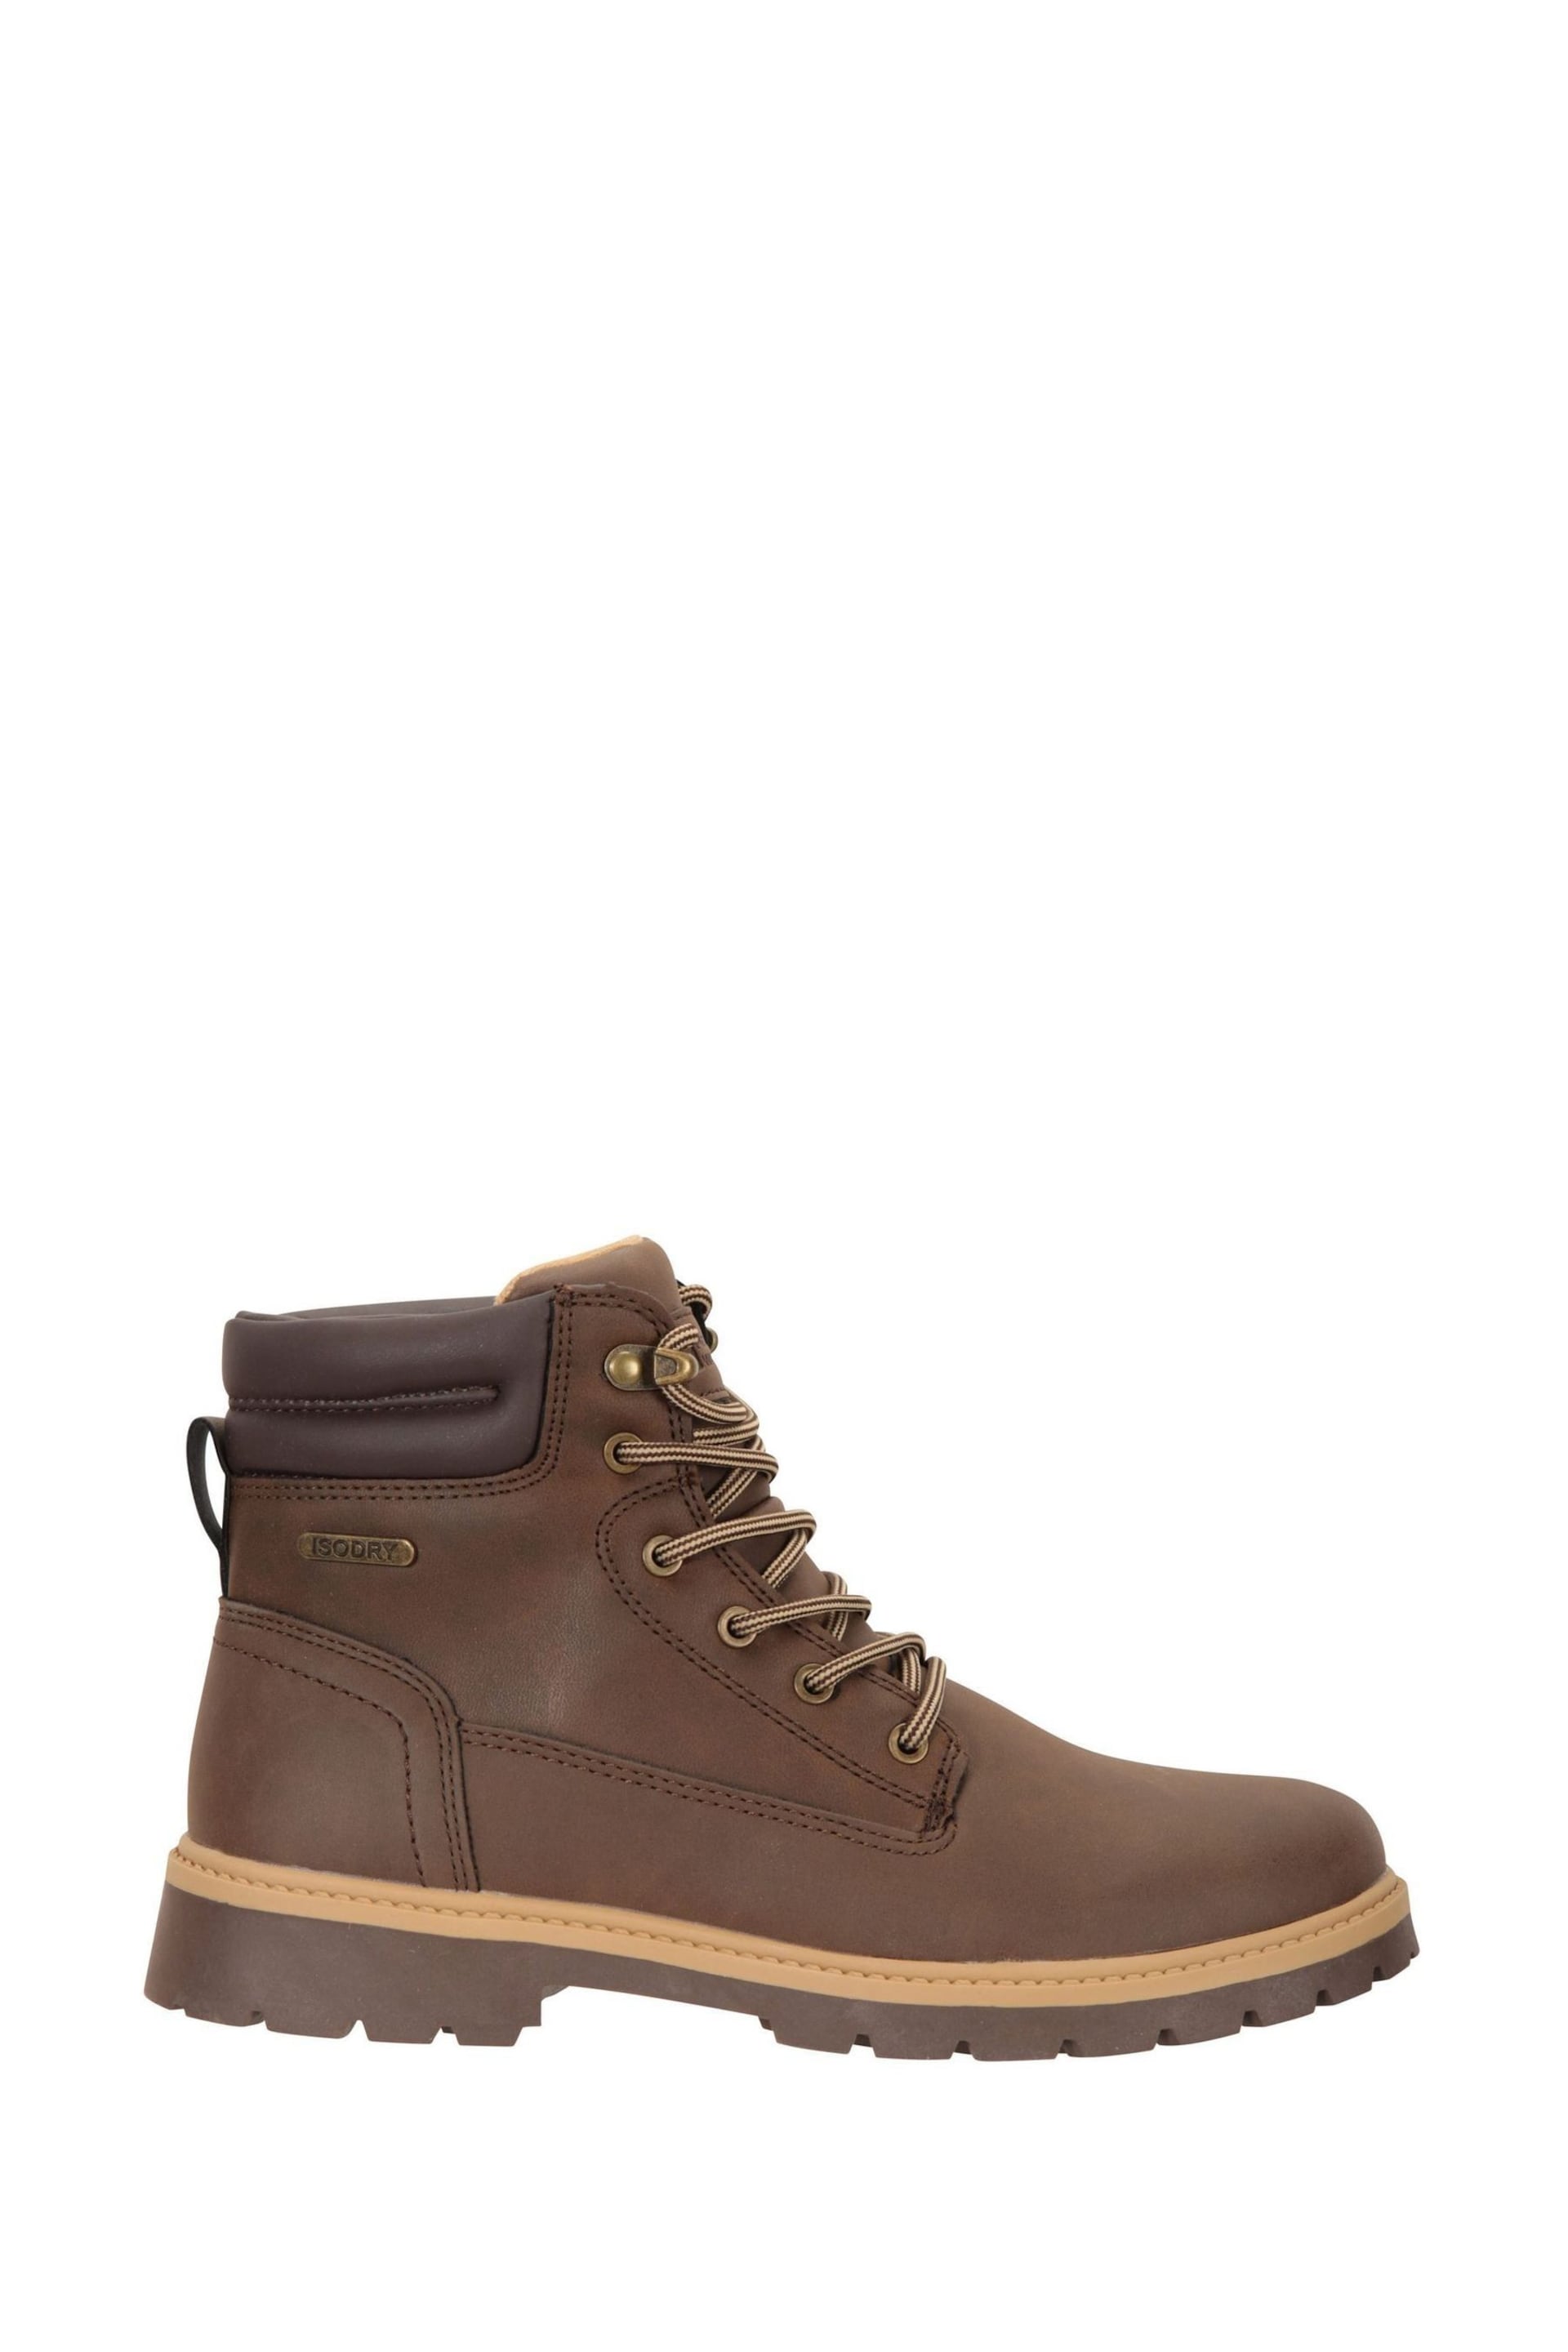 Mountain Warehouse Brown Casual Waterproof Womens Boots - Image 2 of 5